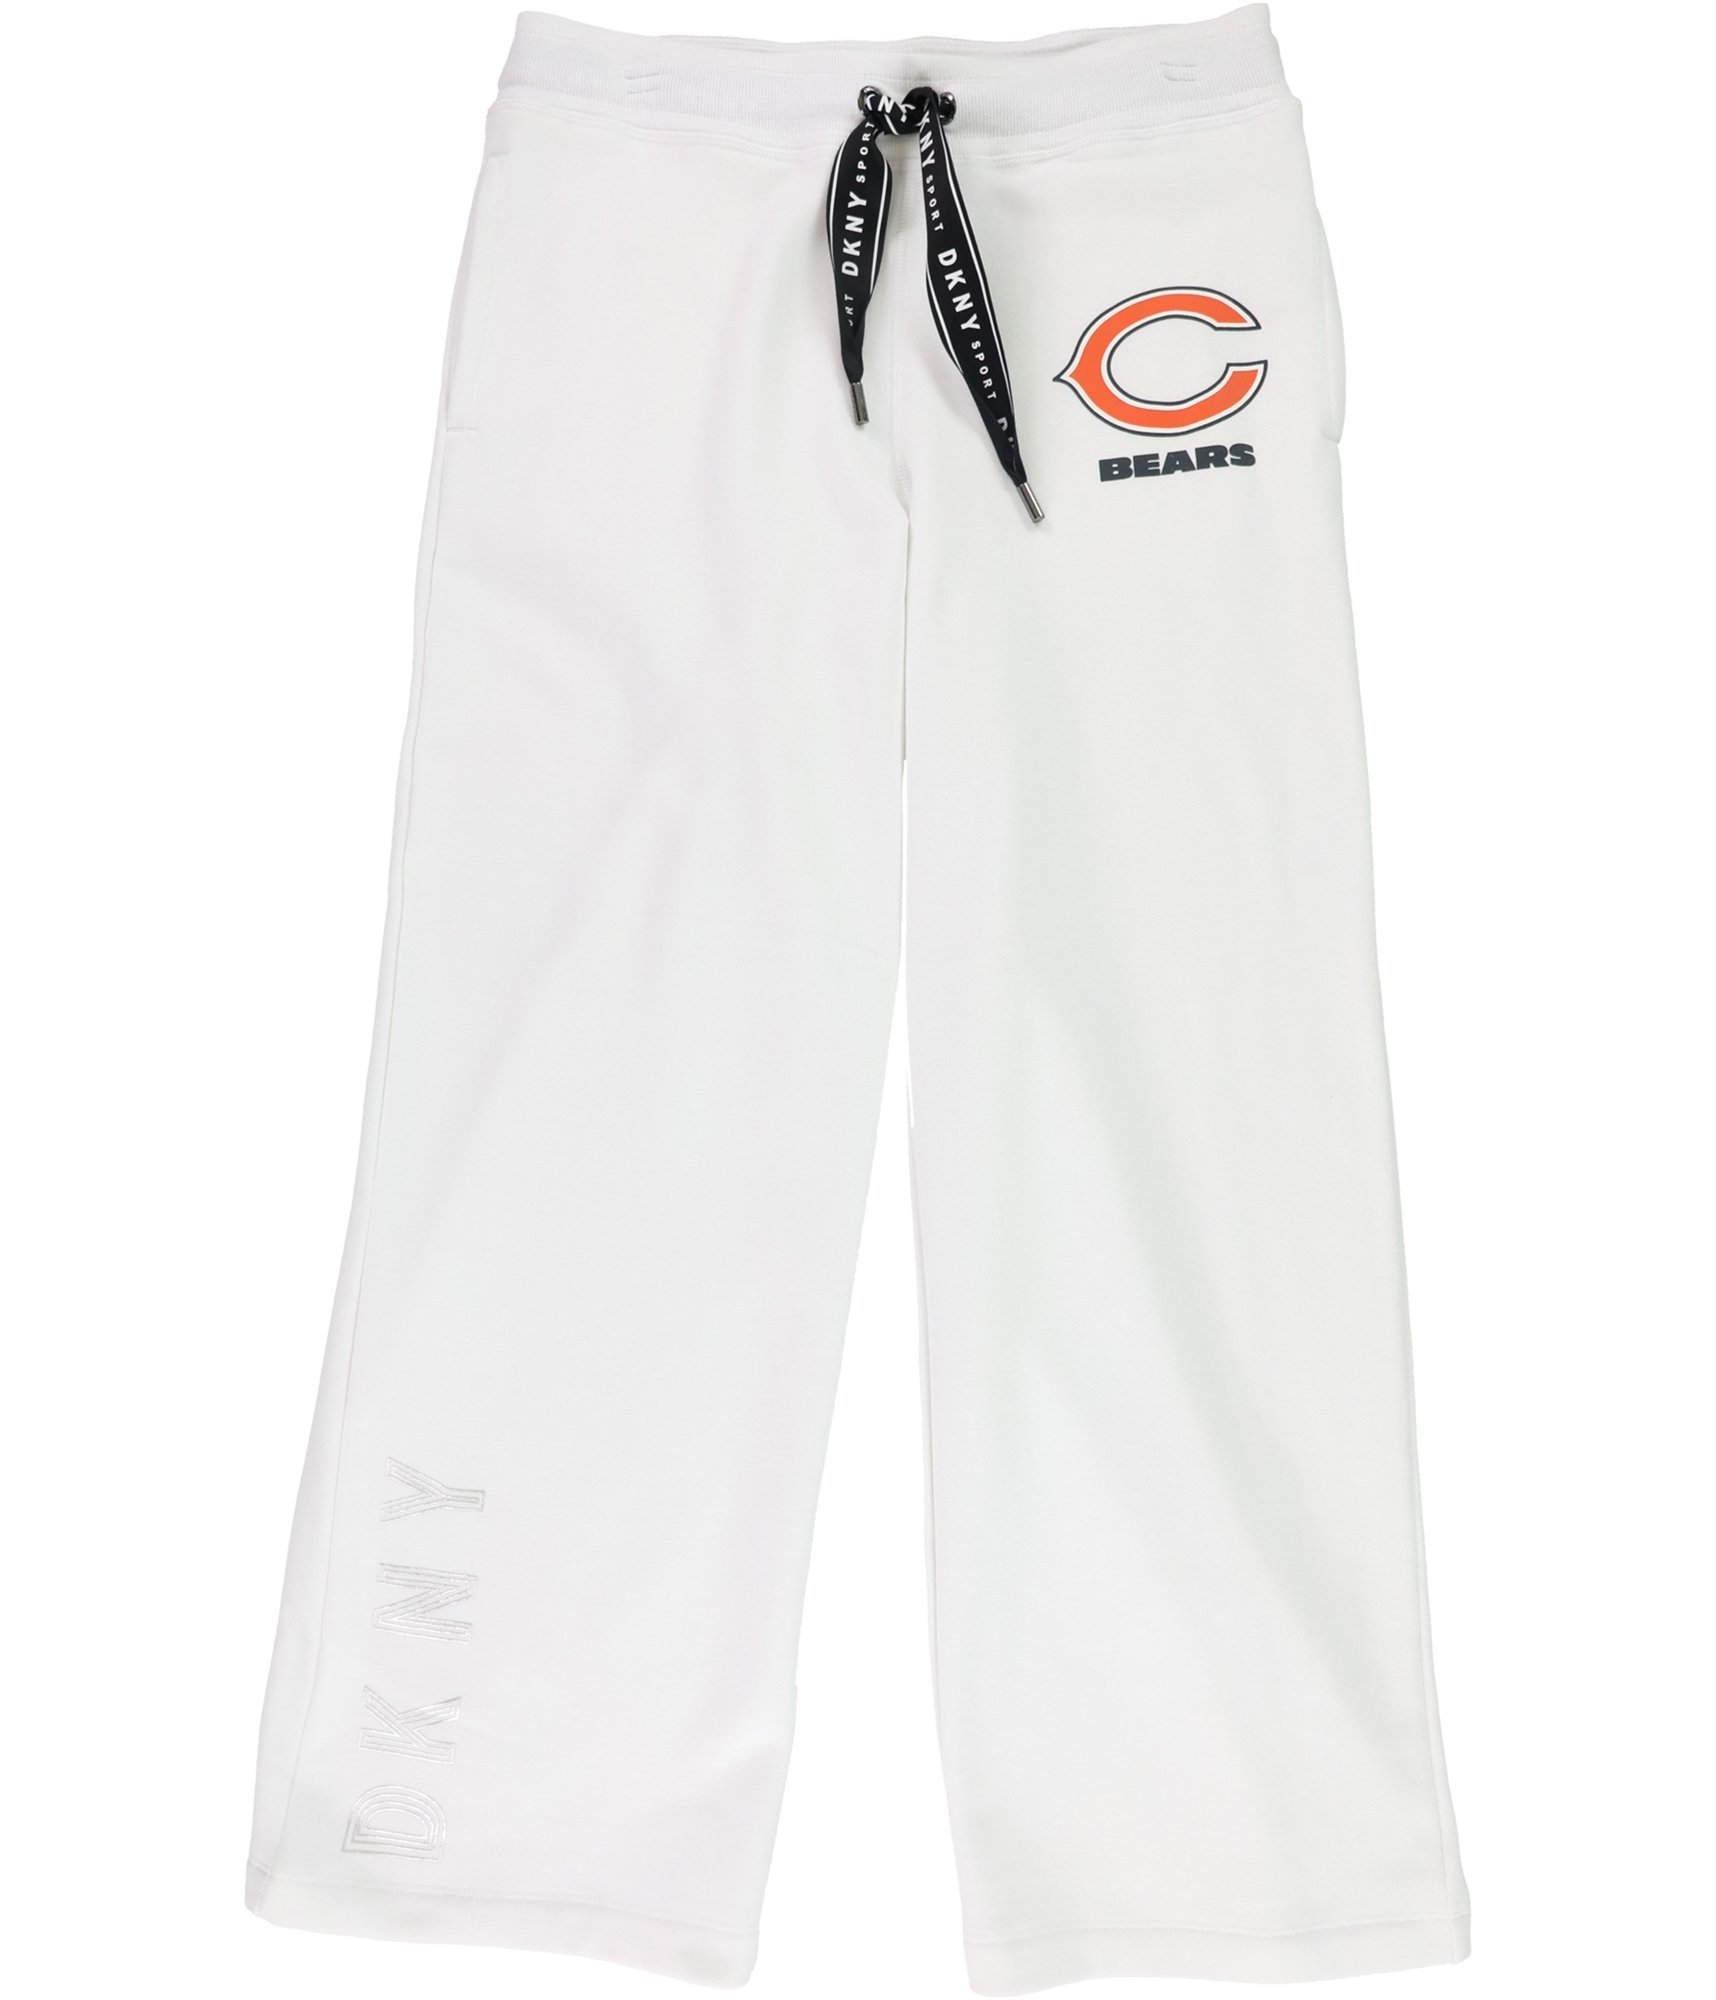 Buy a Dkny Womens Chicago Bears Athletic Sweatpants, TW1